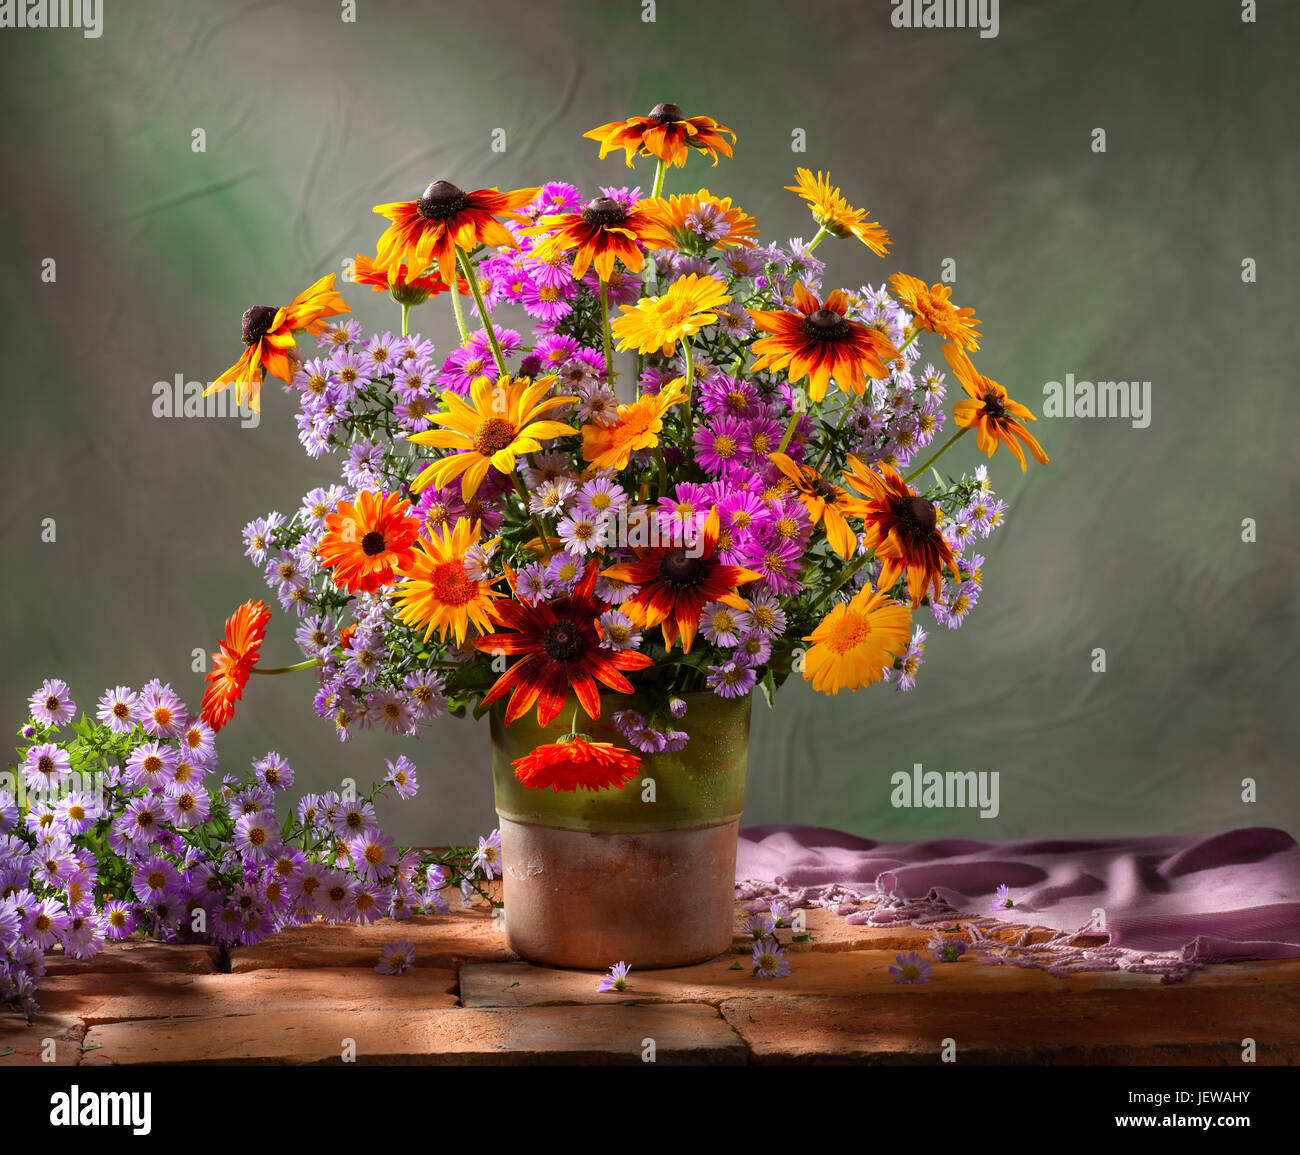 Bouquet of flowers with sunflowers and asters. Stock Photo